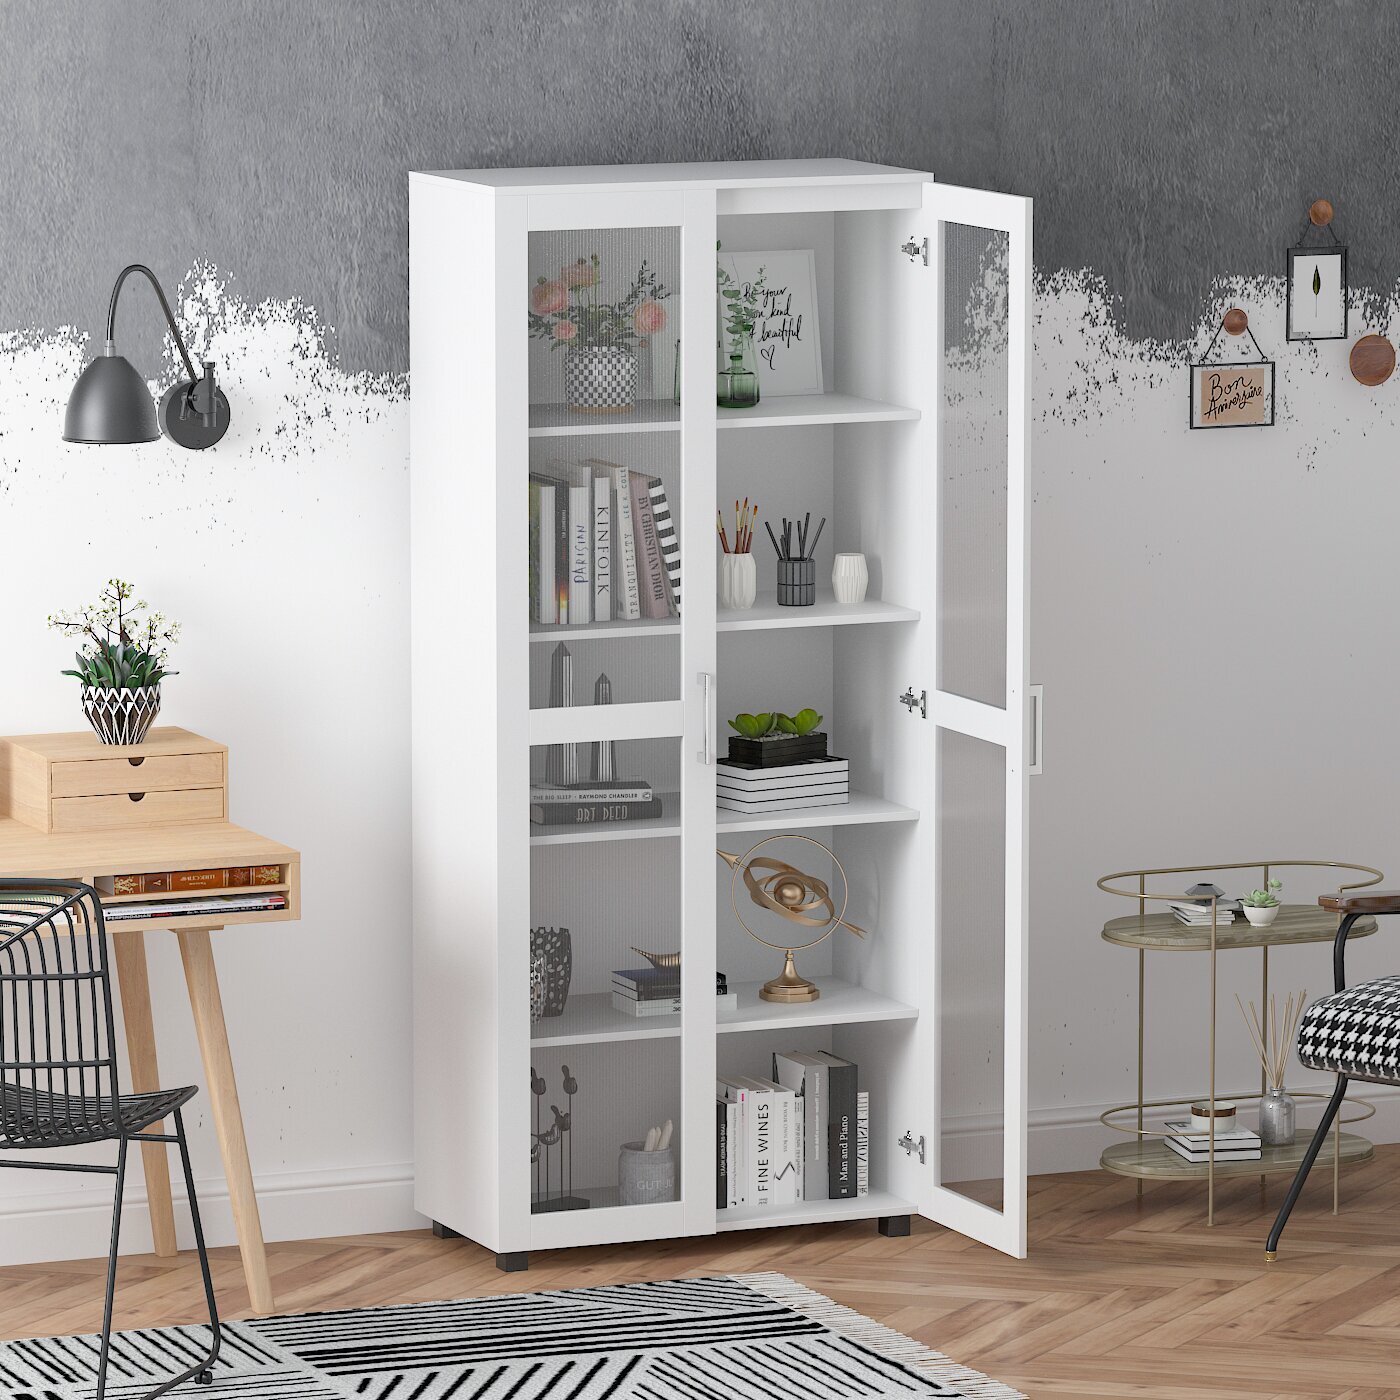 Narrow bookcase with glass doors